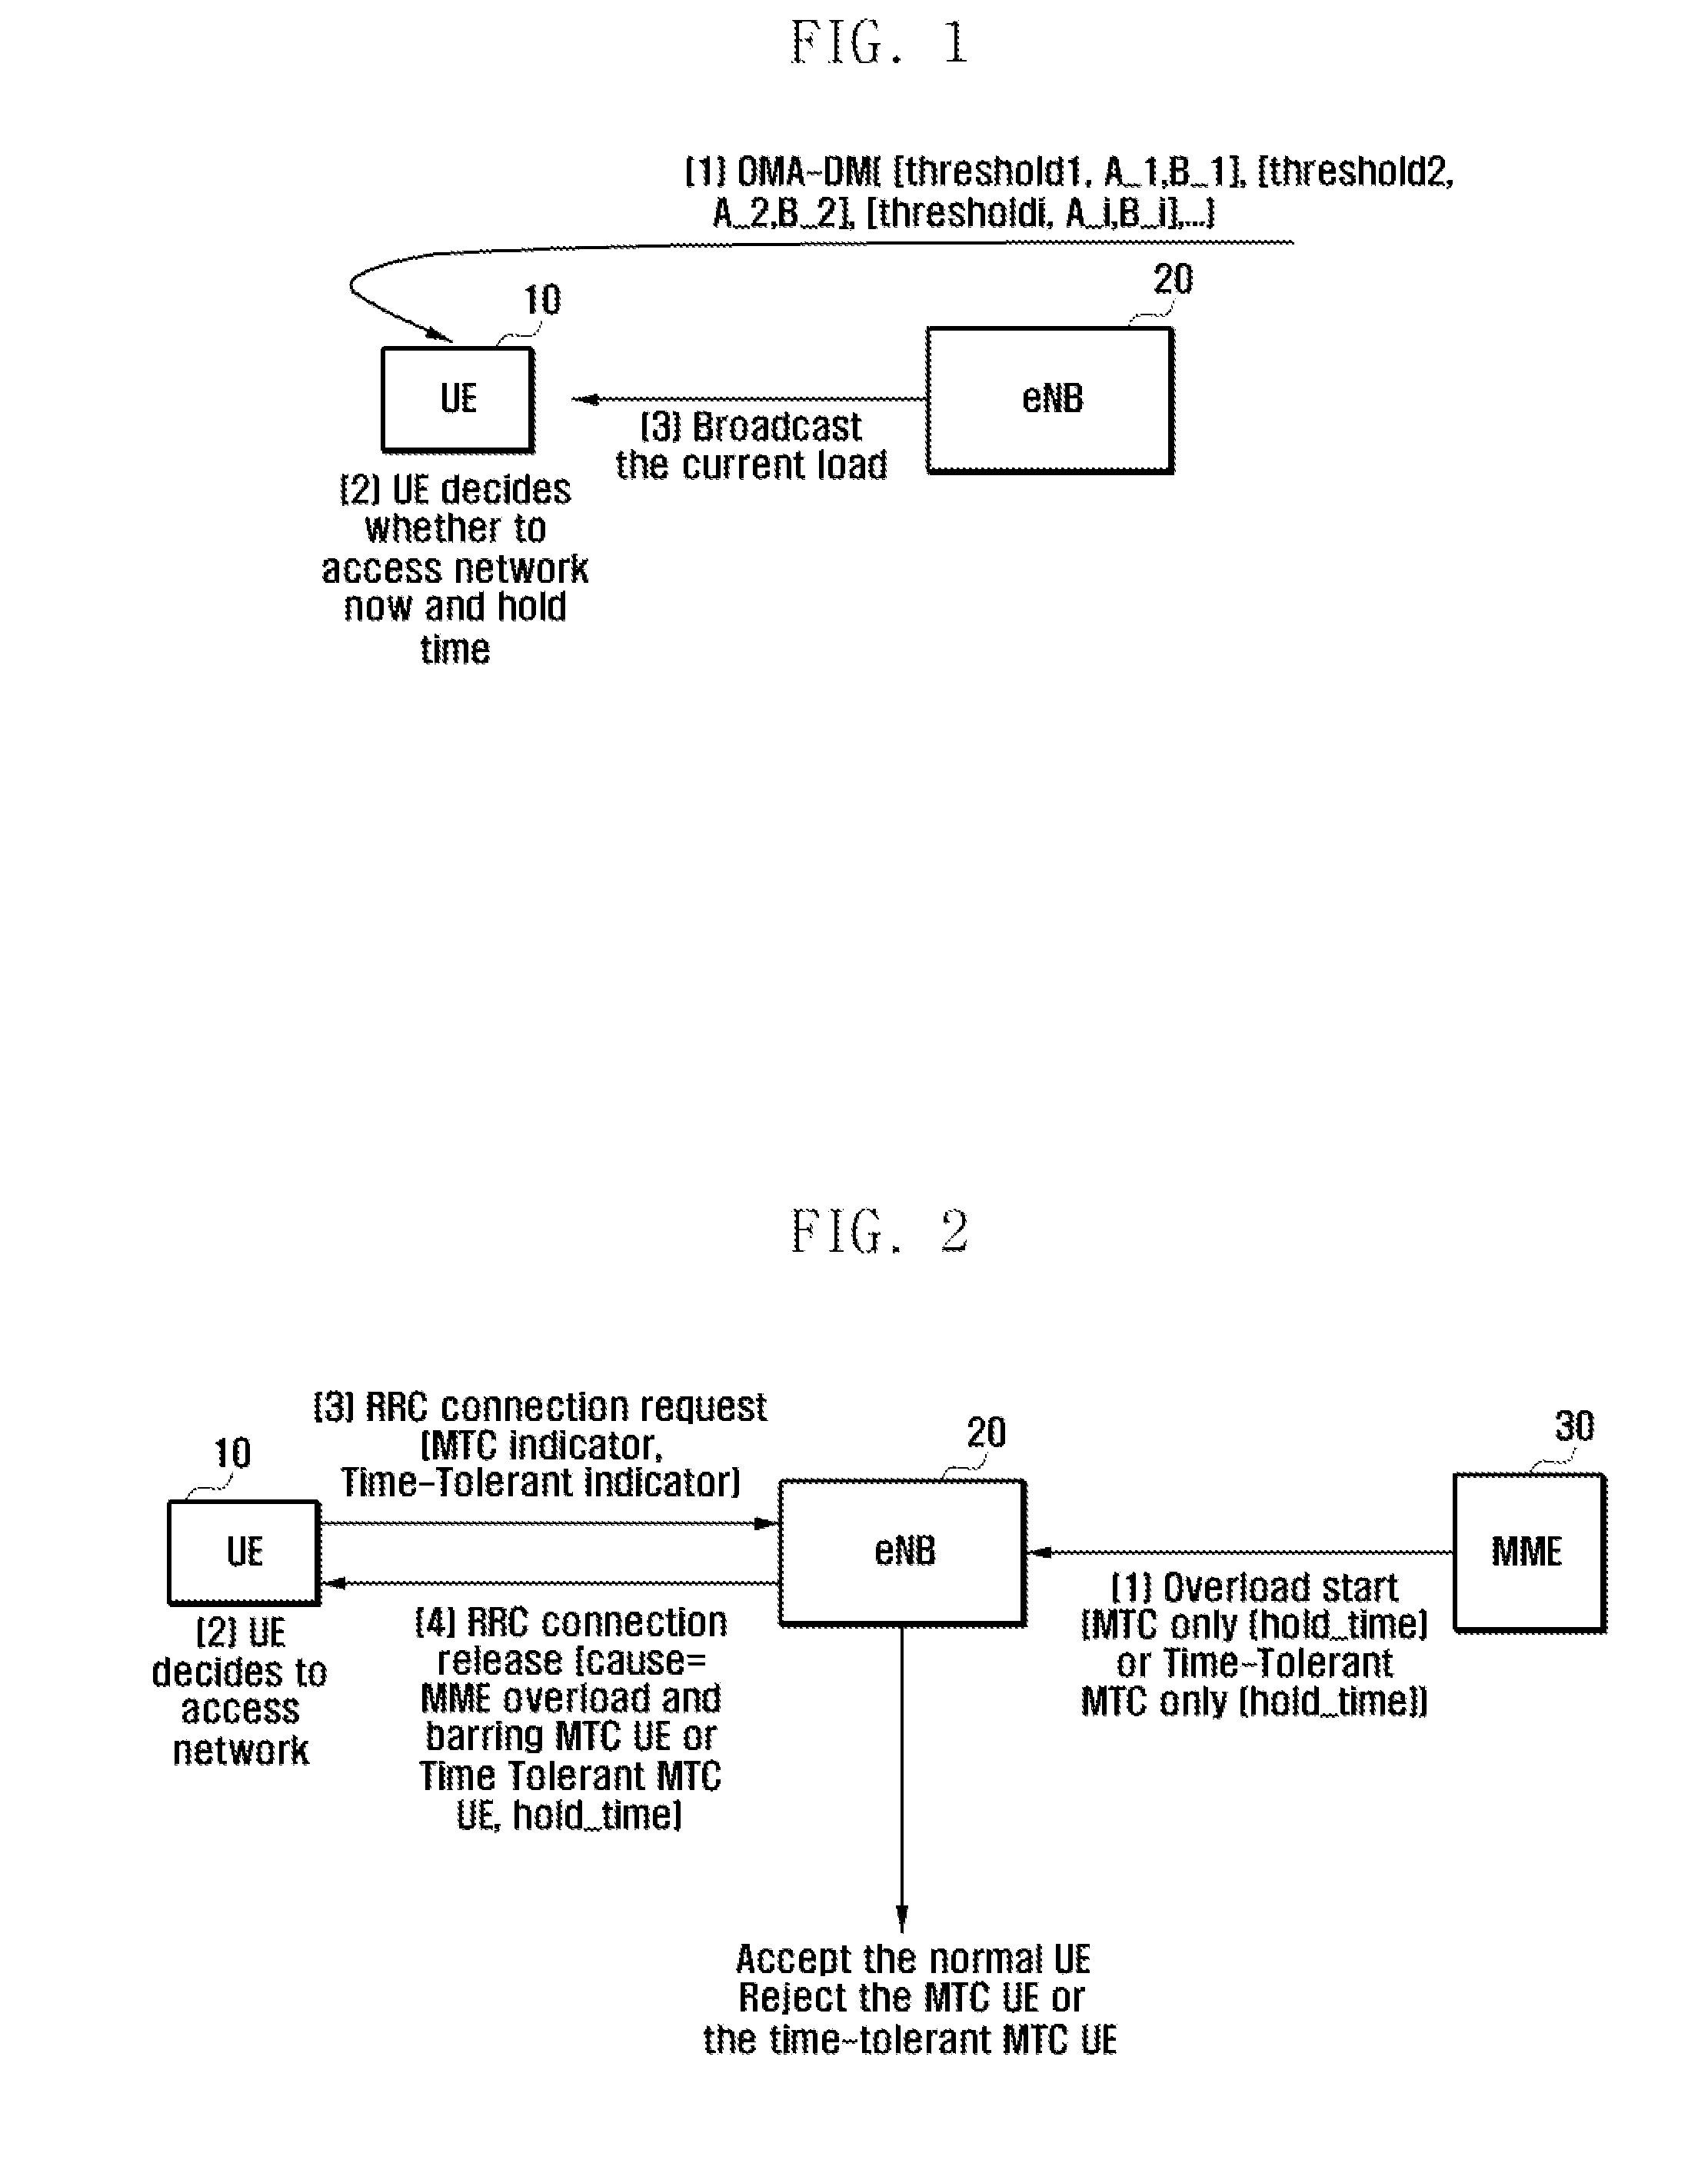 Method and apparatus for controlling network access of ue in wireless communication system